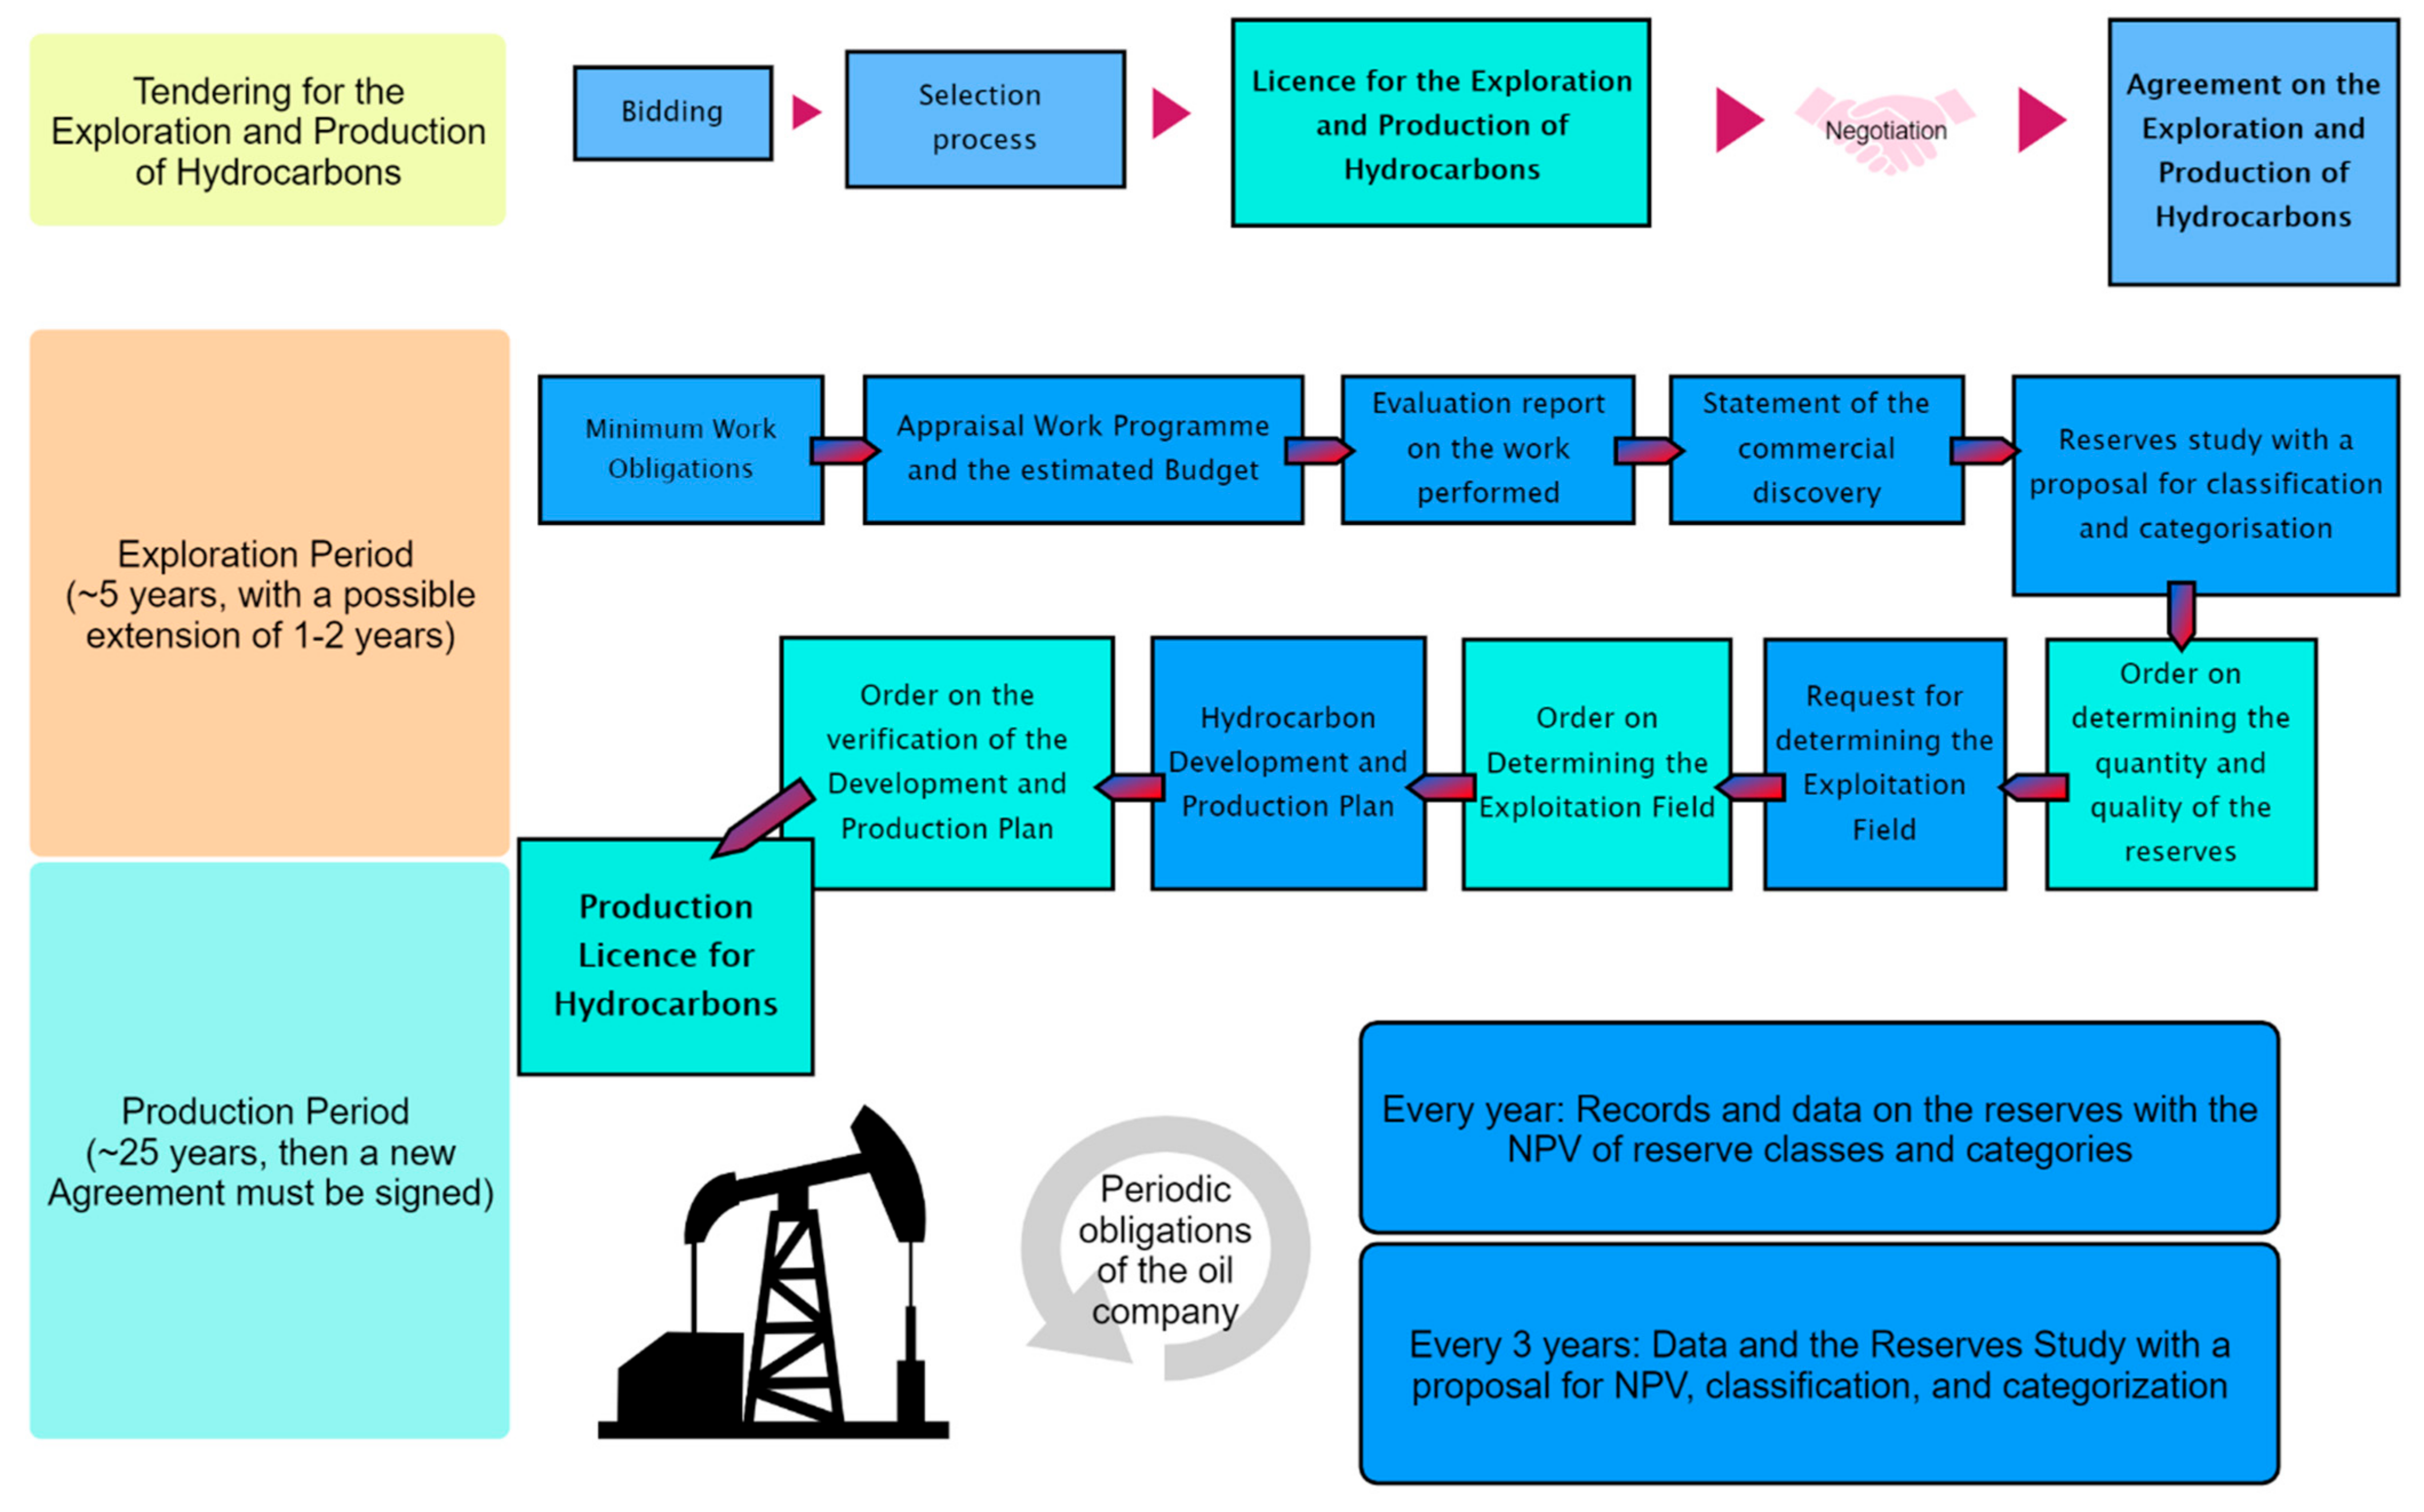 Hydrocarbon Exploration and Production